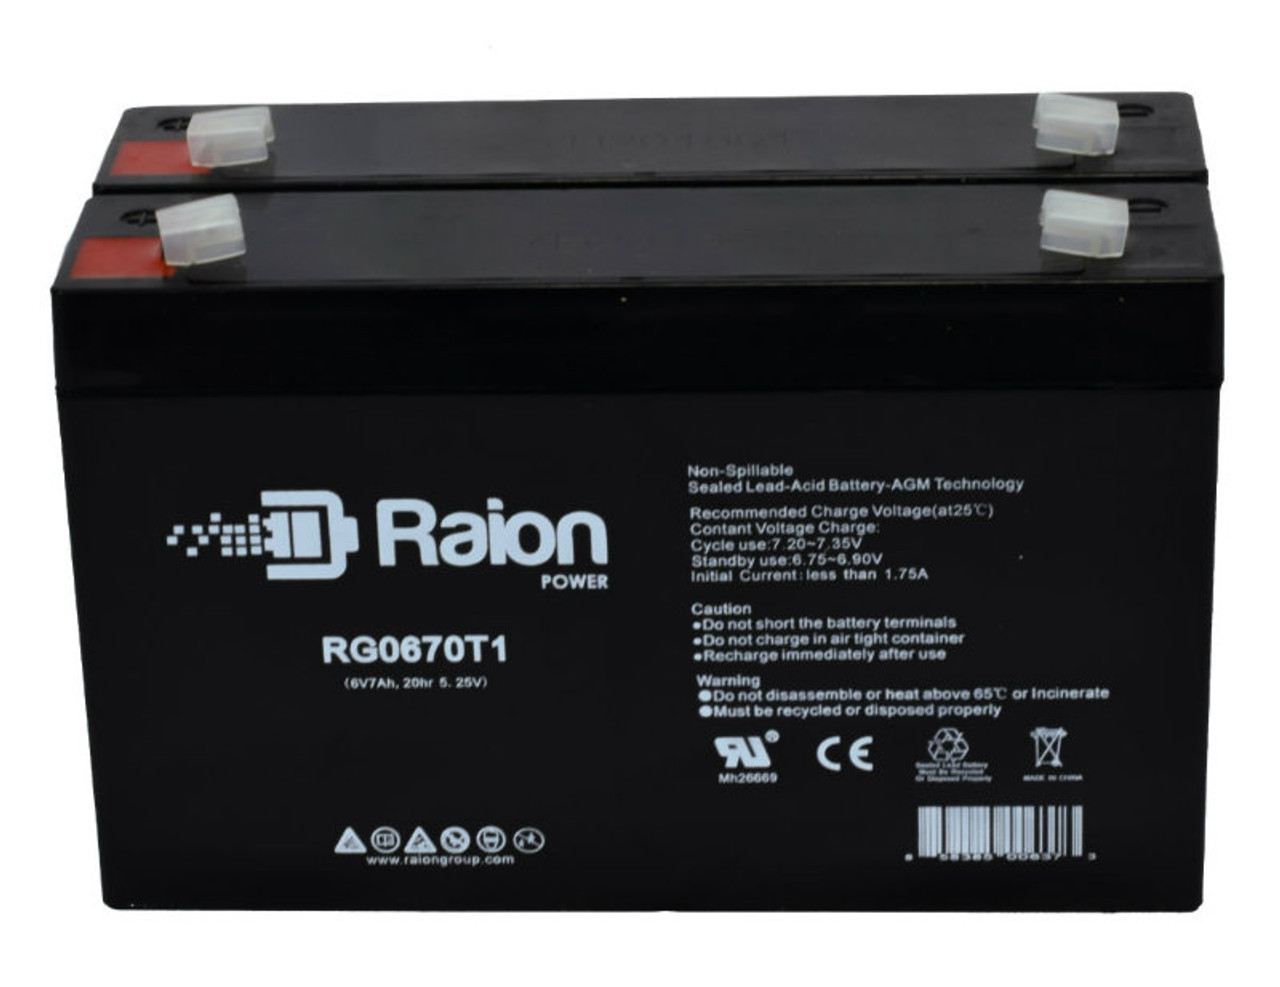 Raion Power RG0670T1 6V 7Ah Replacement Emergency Light Battery for Dual-Lite 12-826 / 12826 / 0120826 - 2 Pack